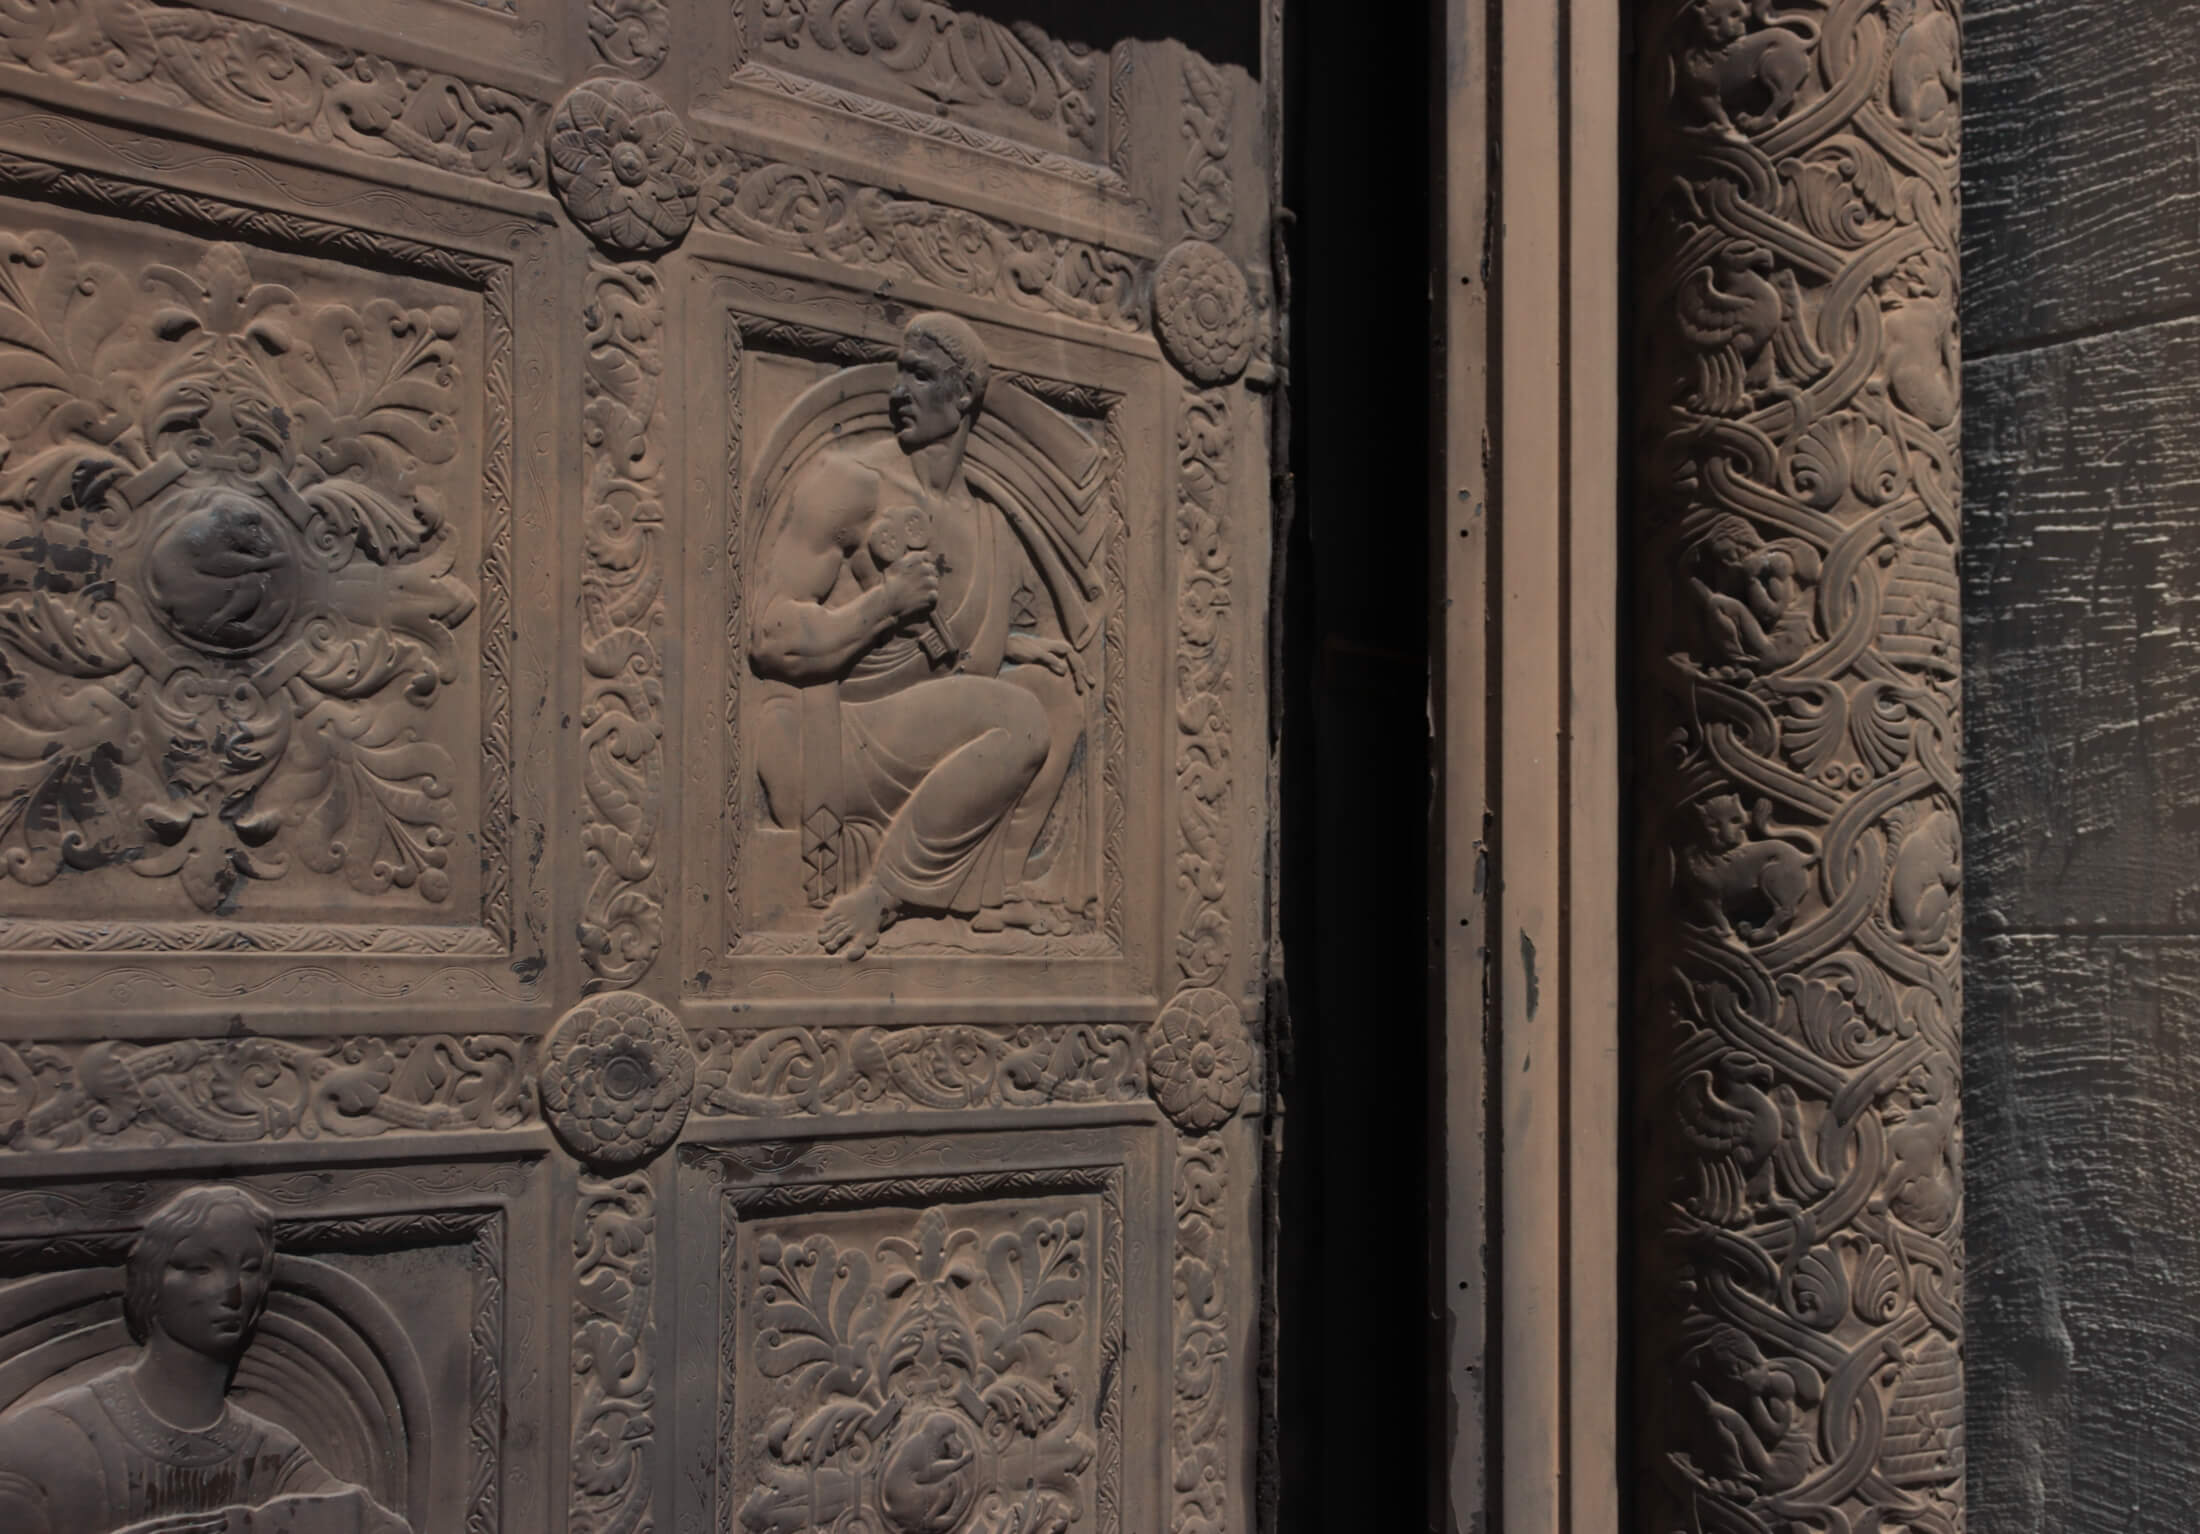 figures and floral patterns on the doors